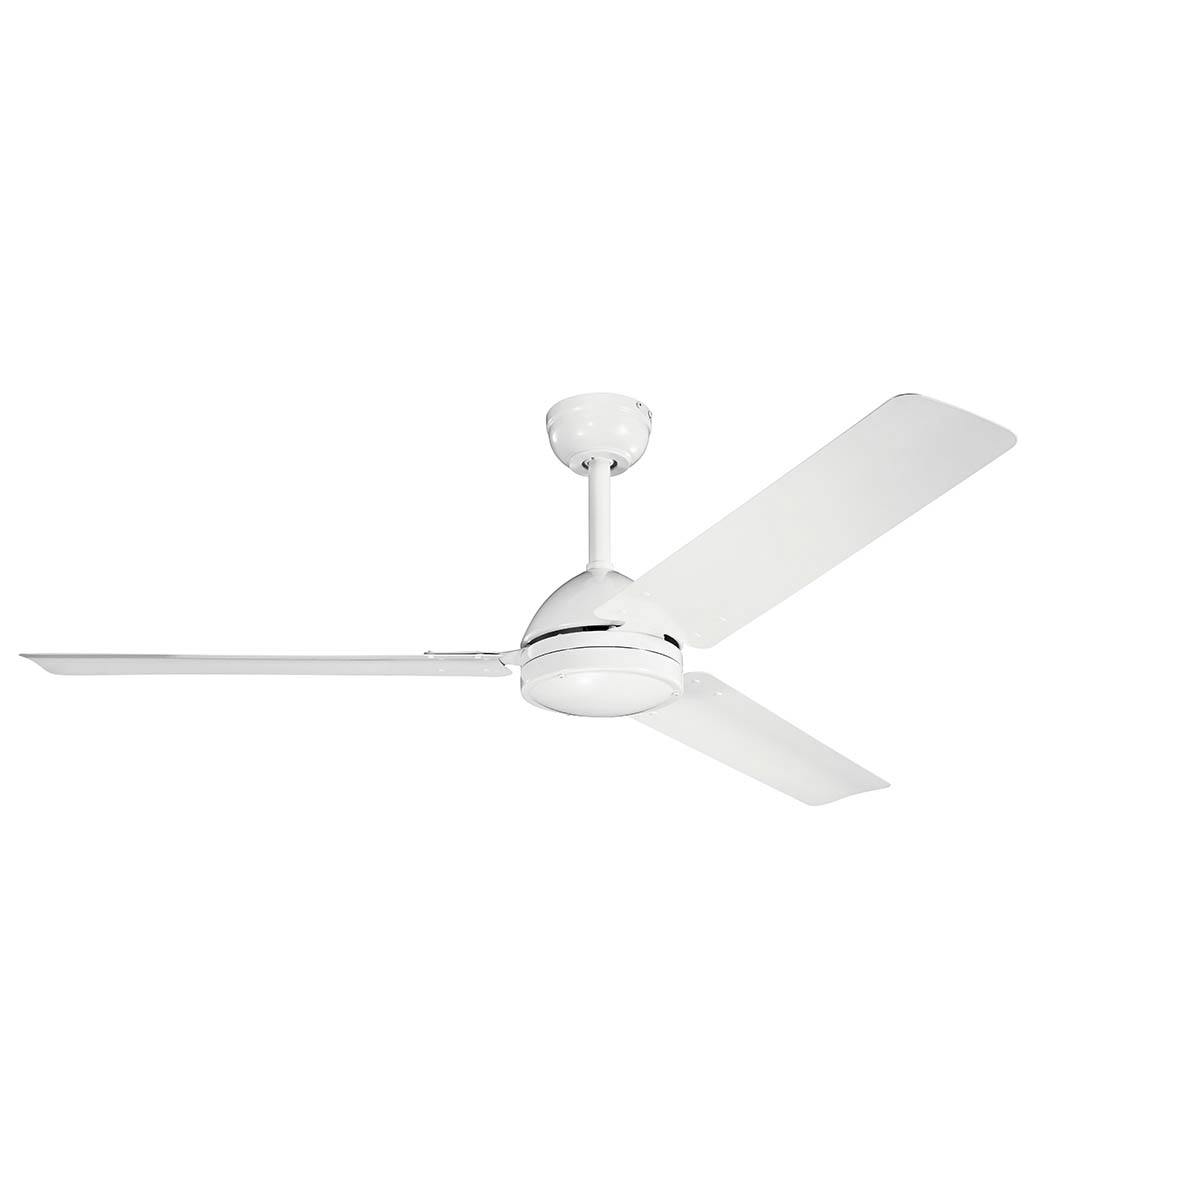 Todo 56" Ceiling Fan in a White finish on a white background